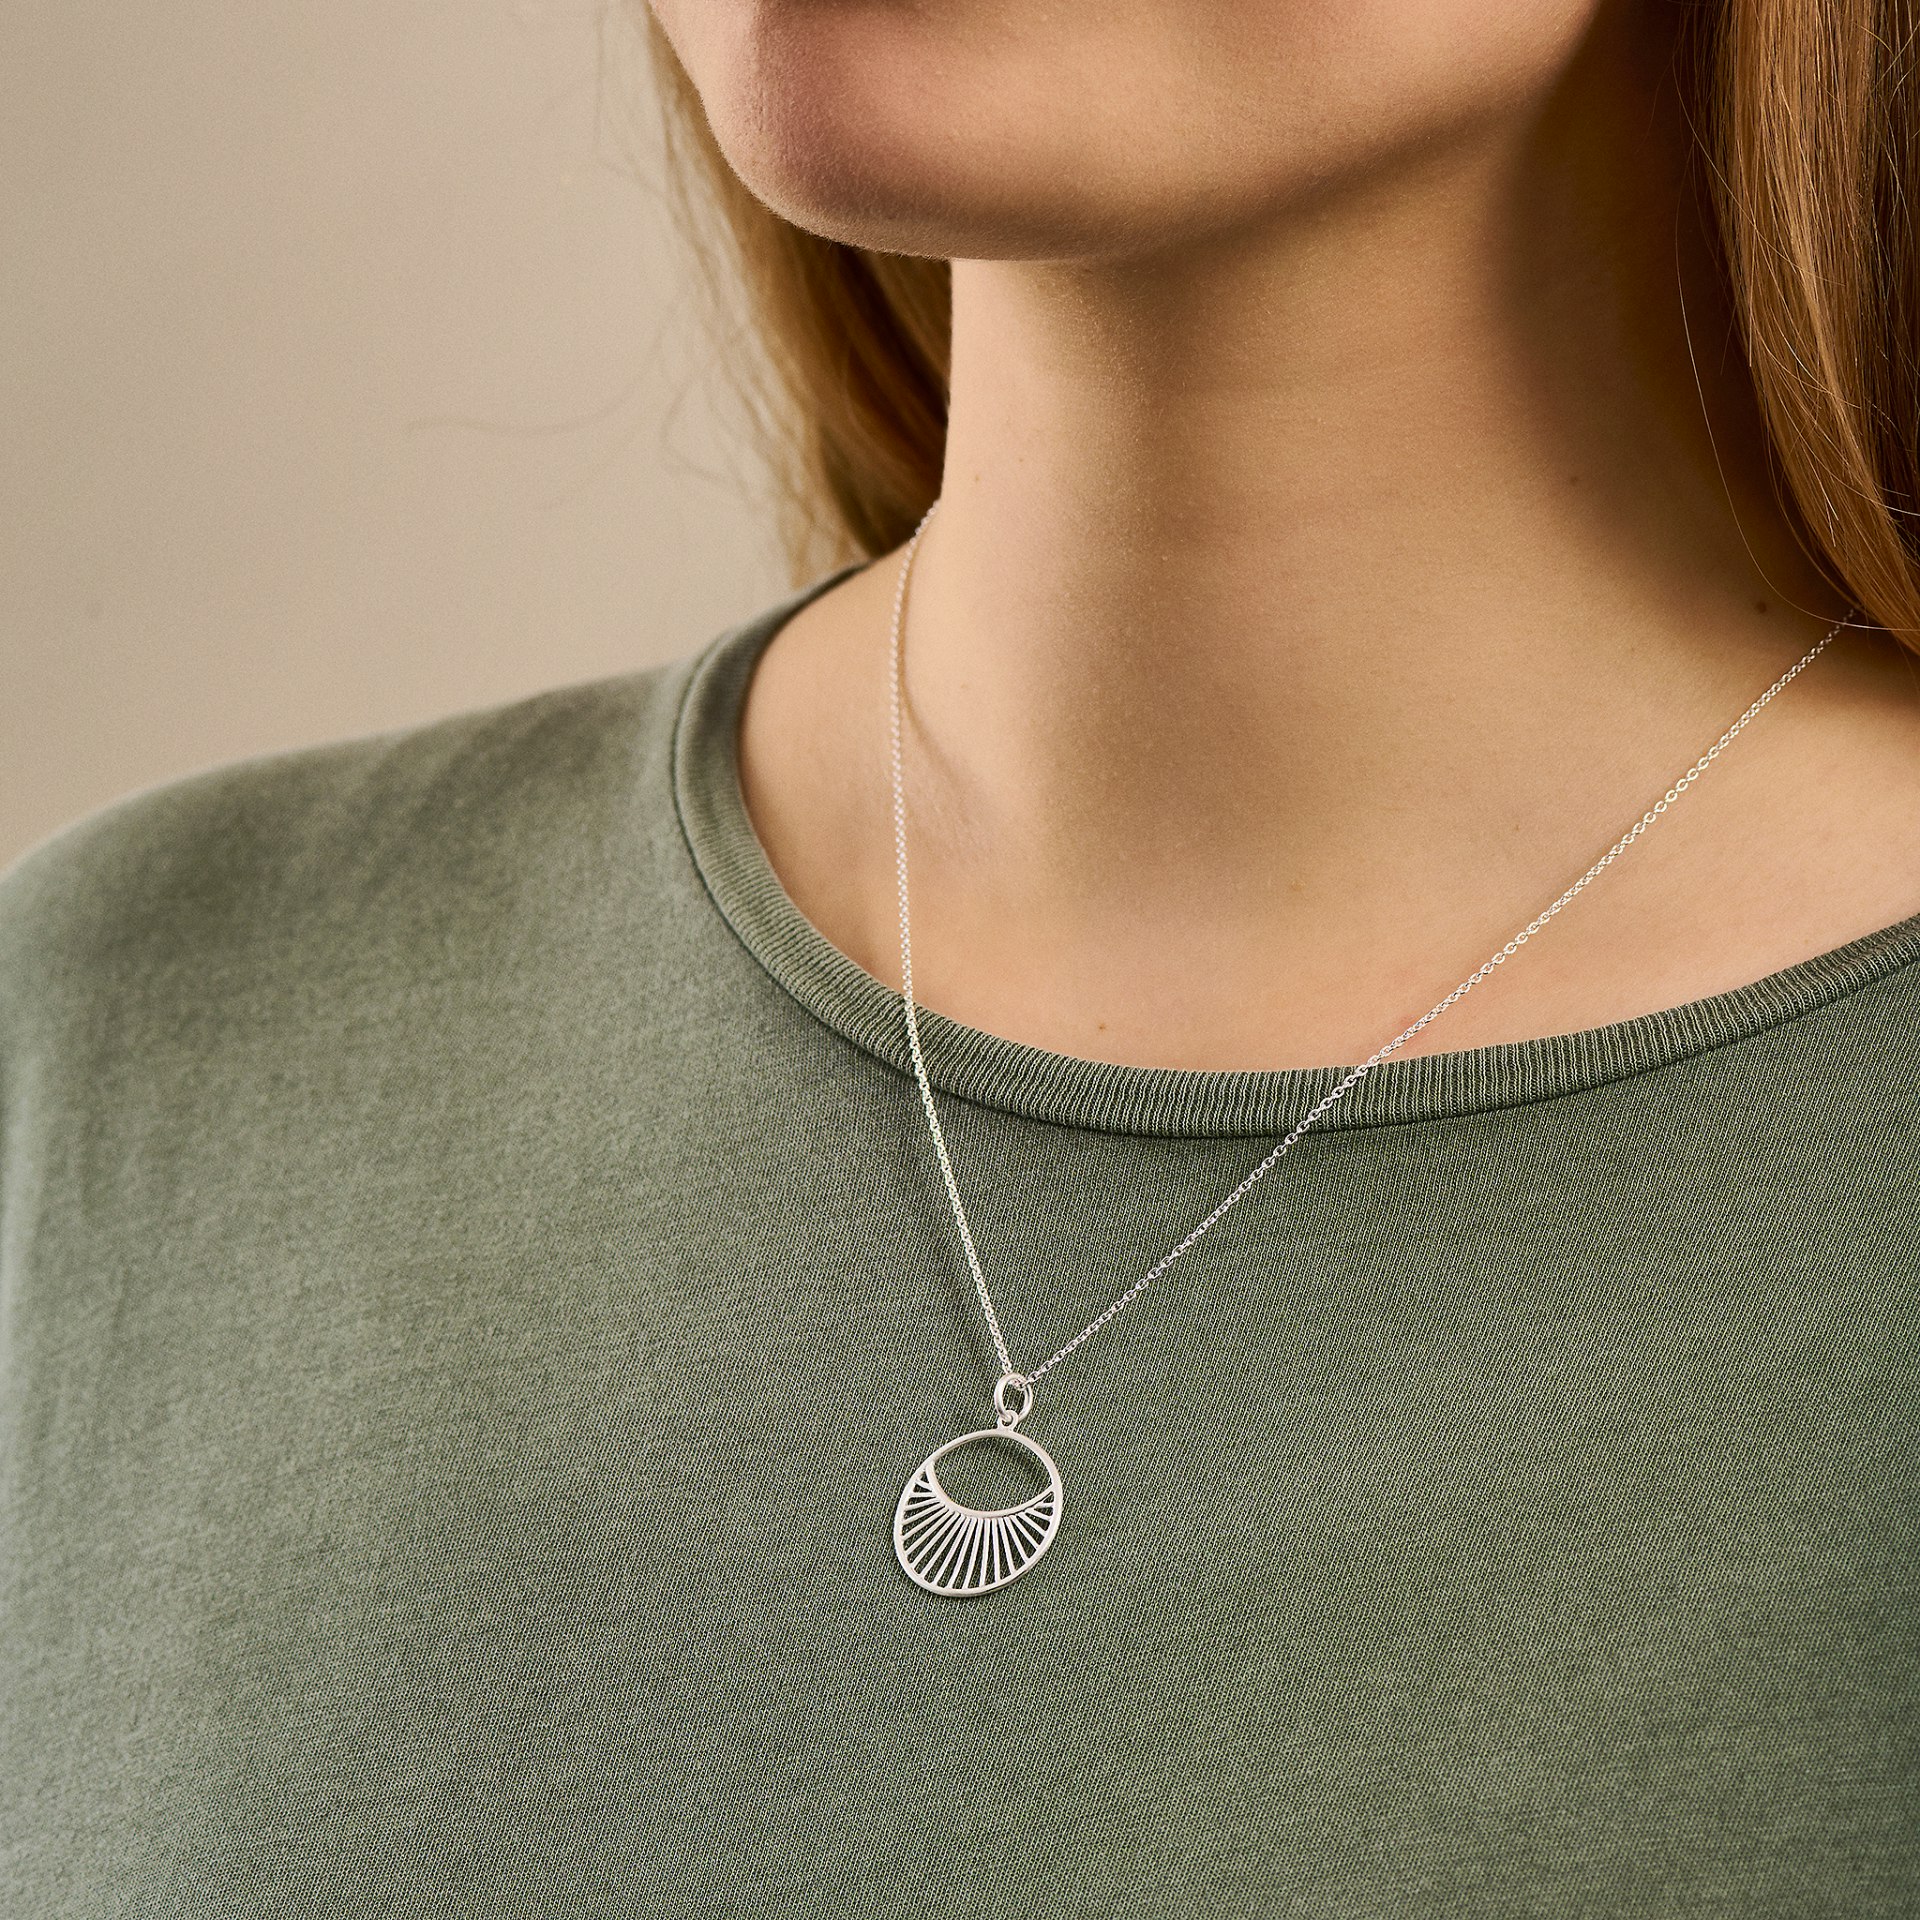 Daylight Short necklace from Pernille Corydon in Silver Sterling 925